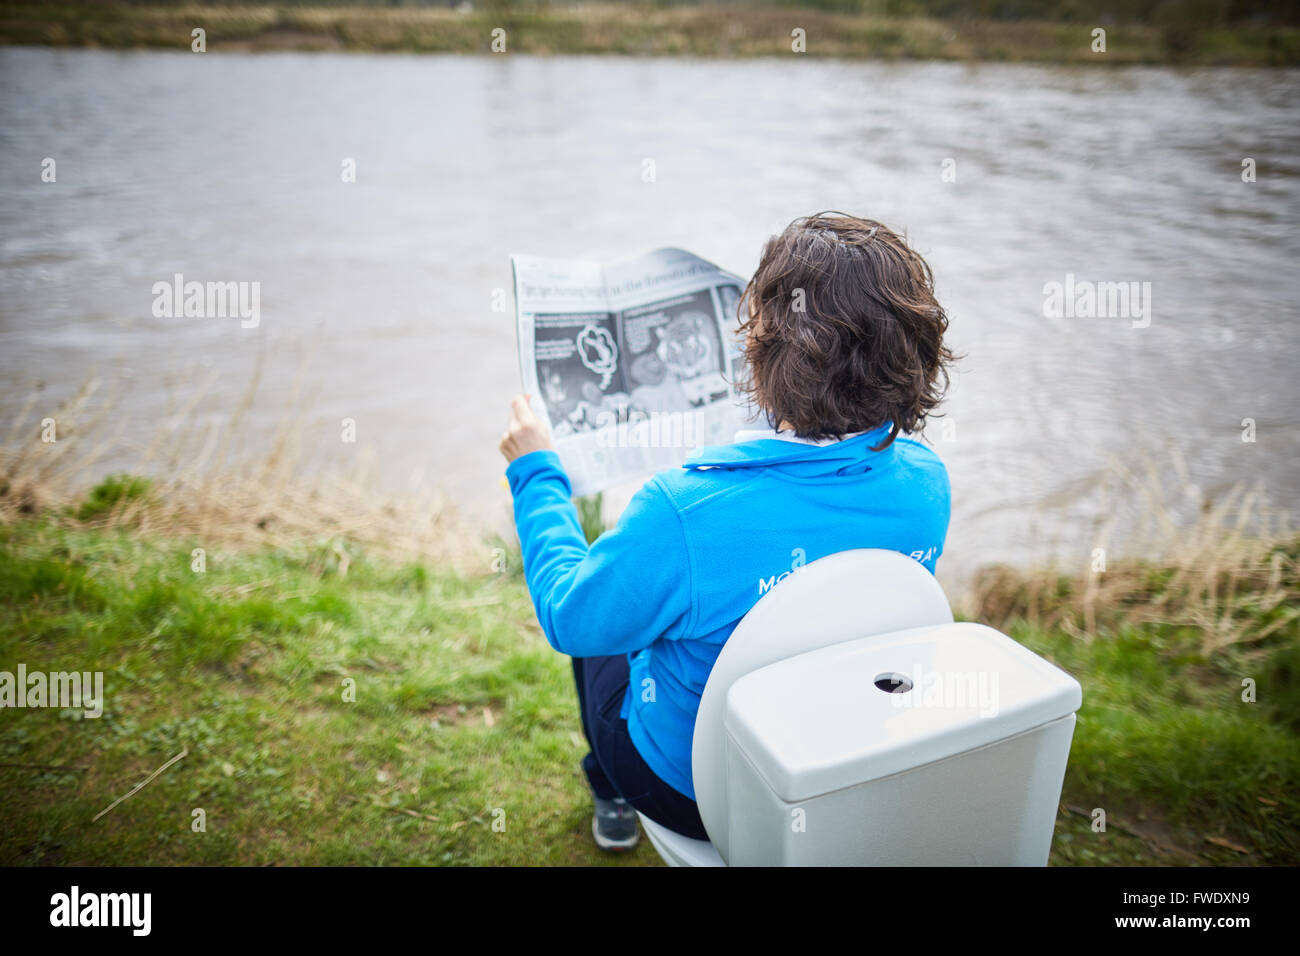 Sat on a toilet reading newspaper loo potty urinal sitting using sewage Stock Photo